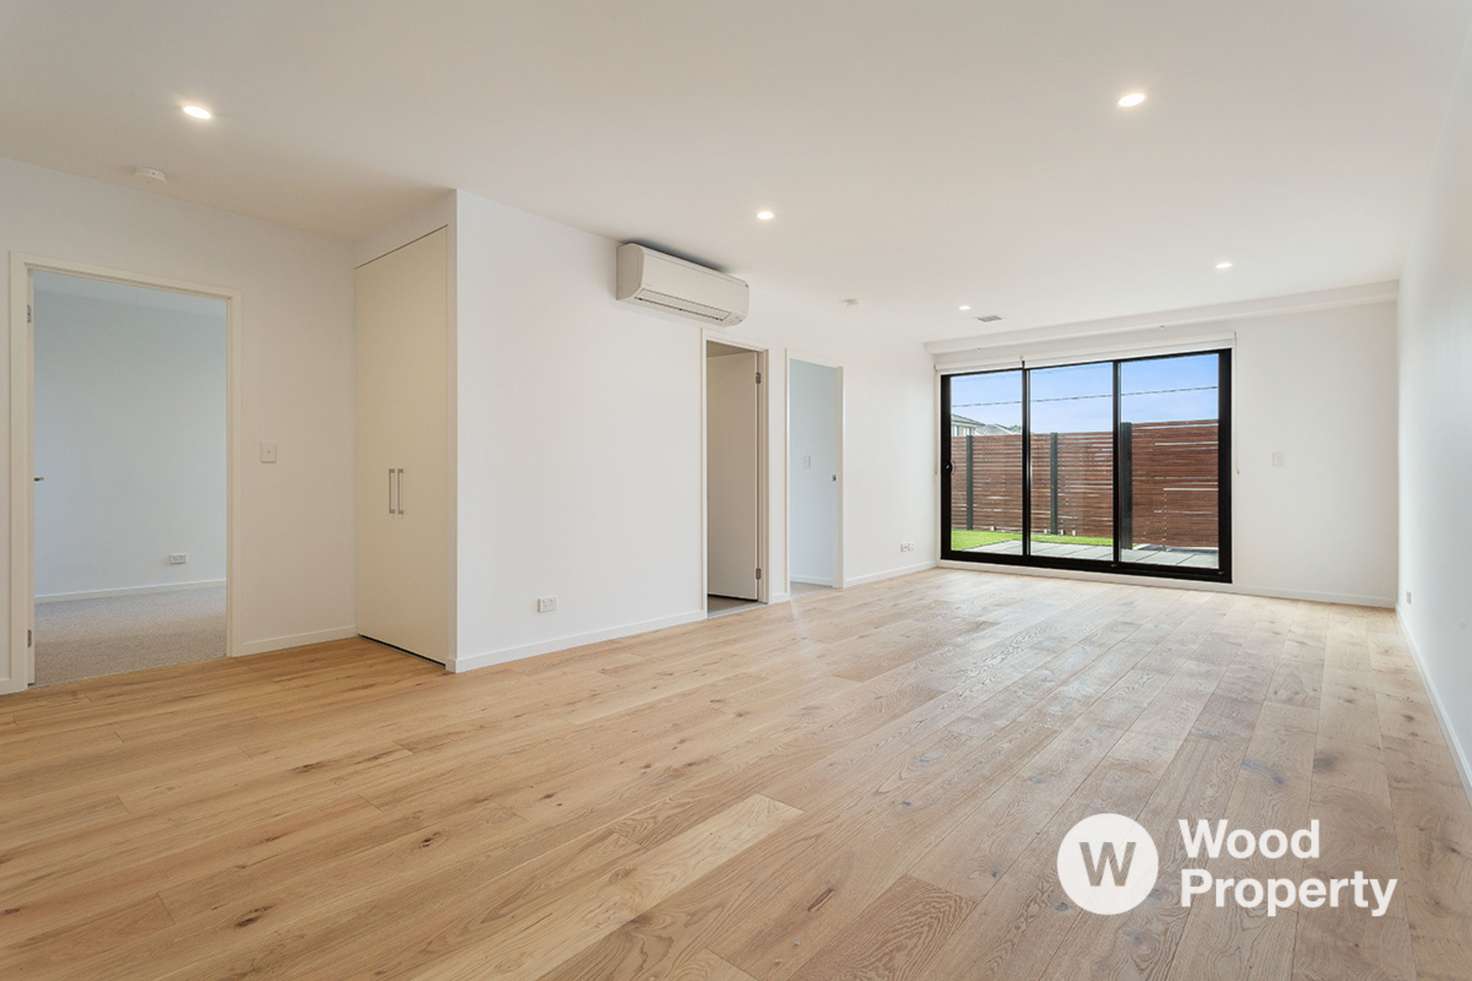 Main view of Homely apartment listing, 10/27 Jasper Rd, Bentleigh VIC 3204